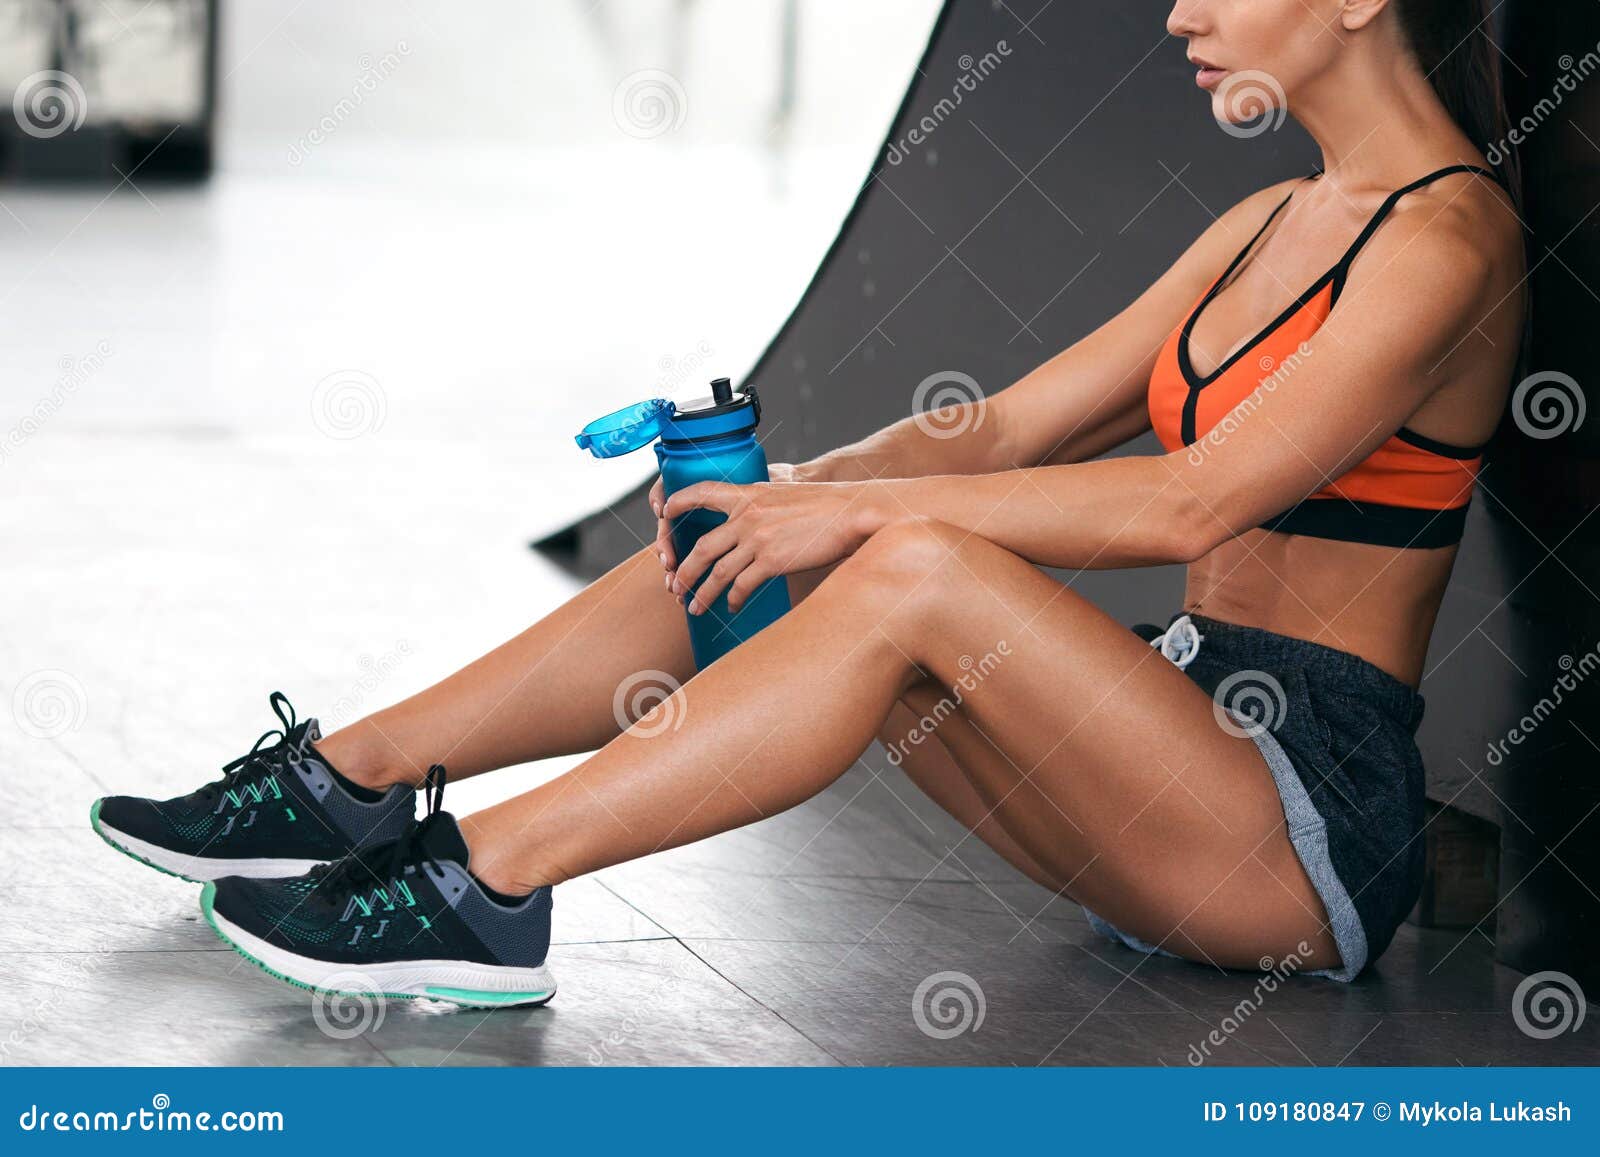 fitness woman with a bottle of water. active girl quenches thirst, workout